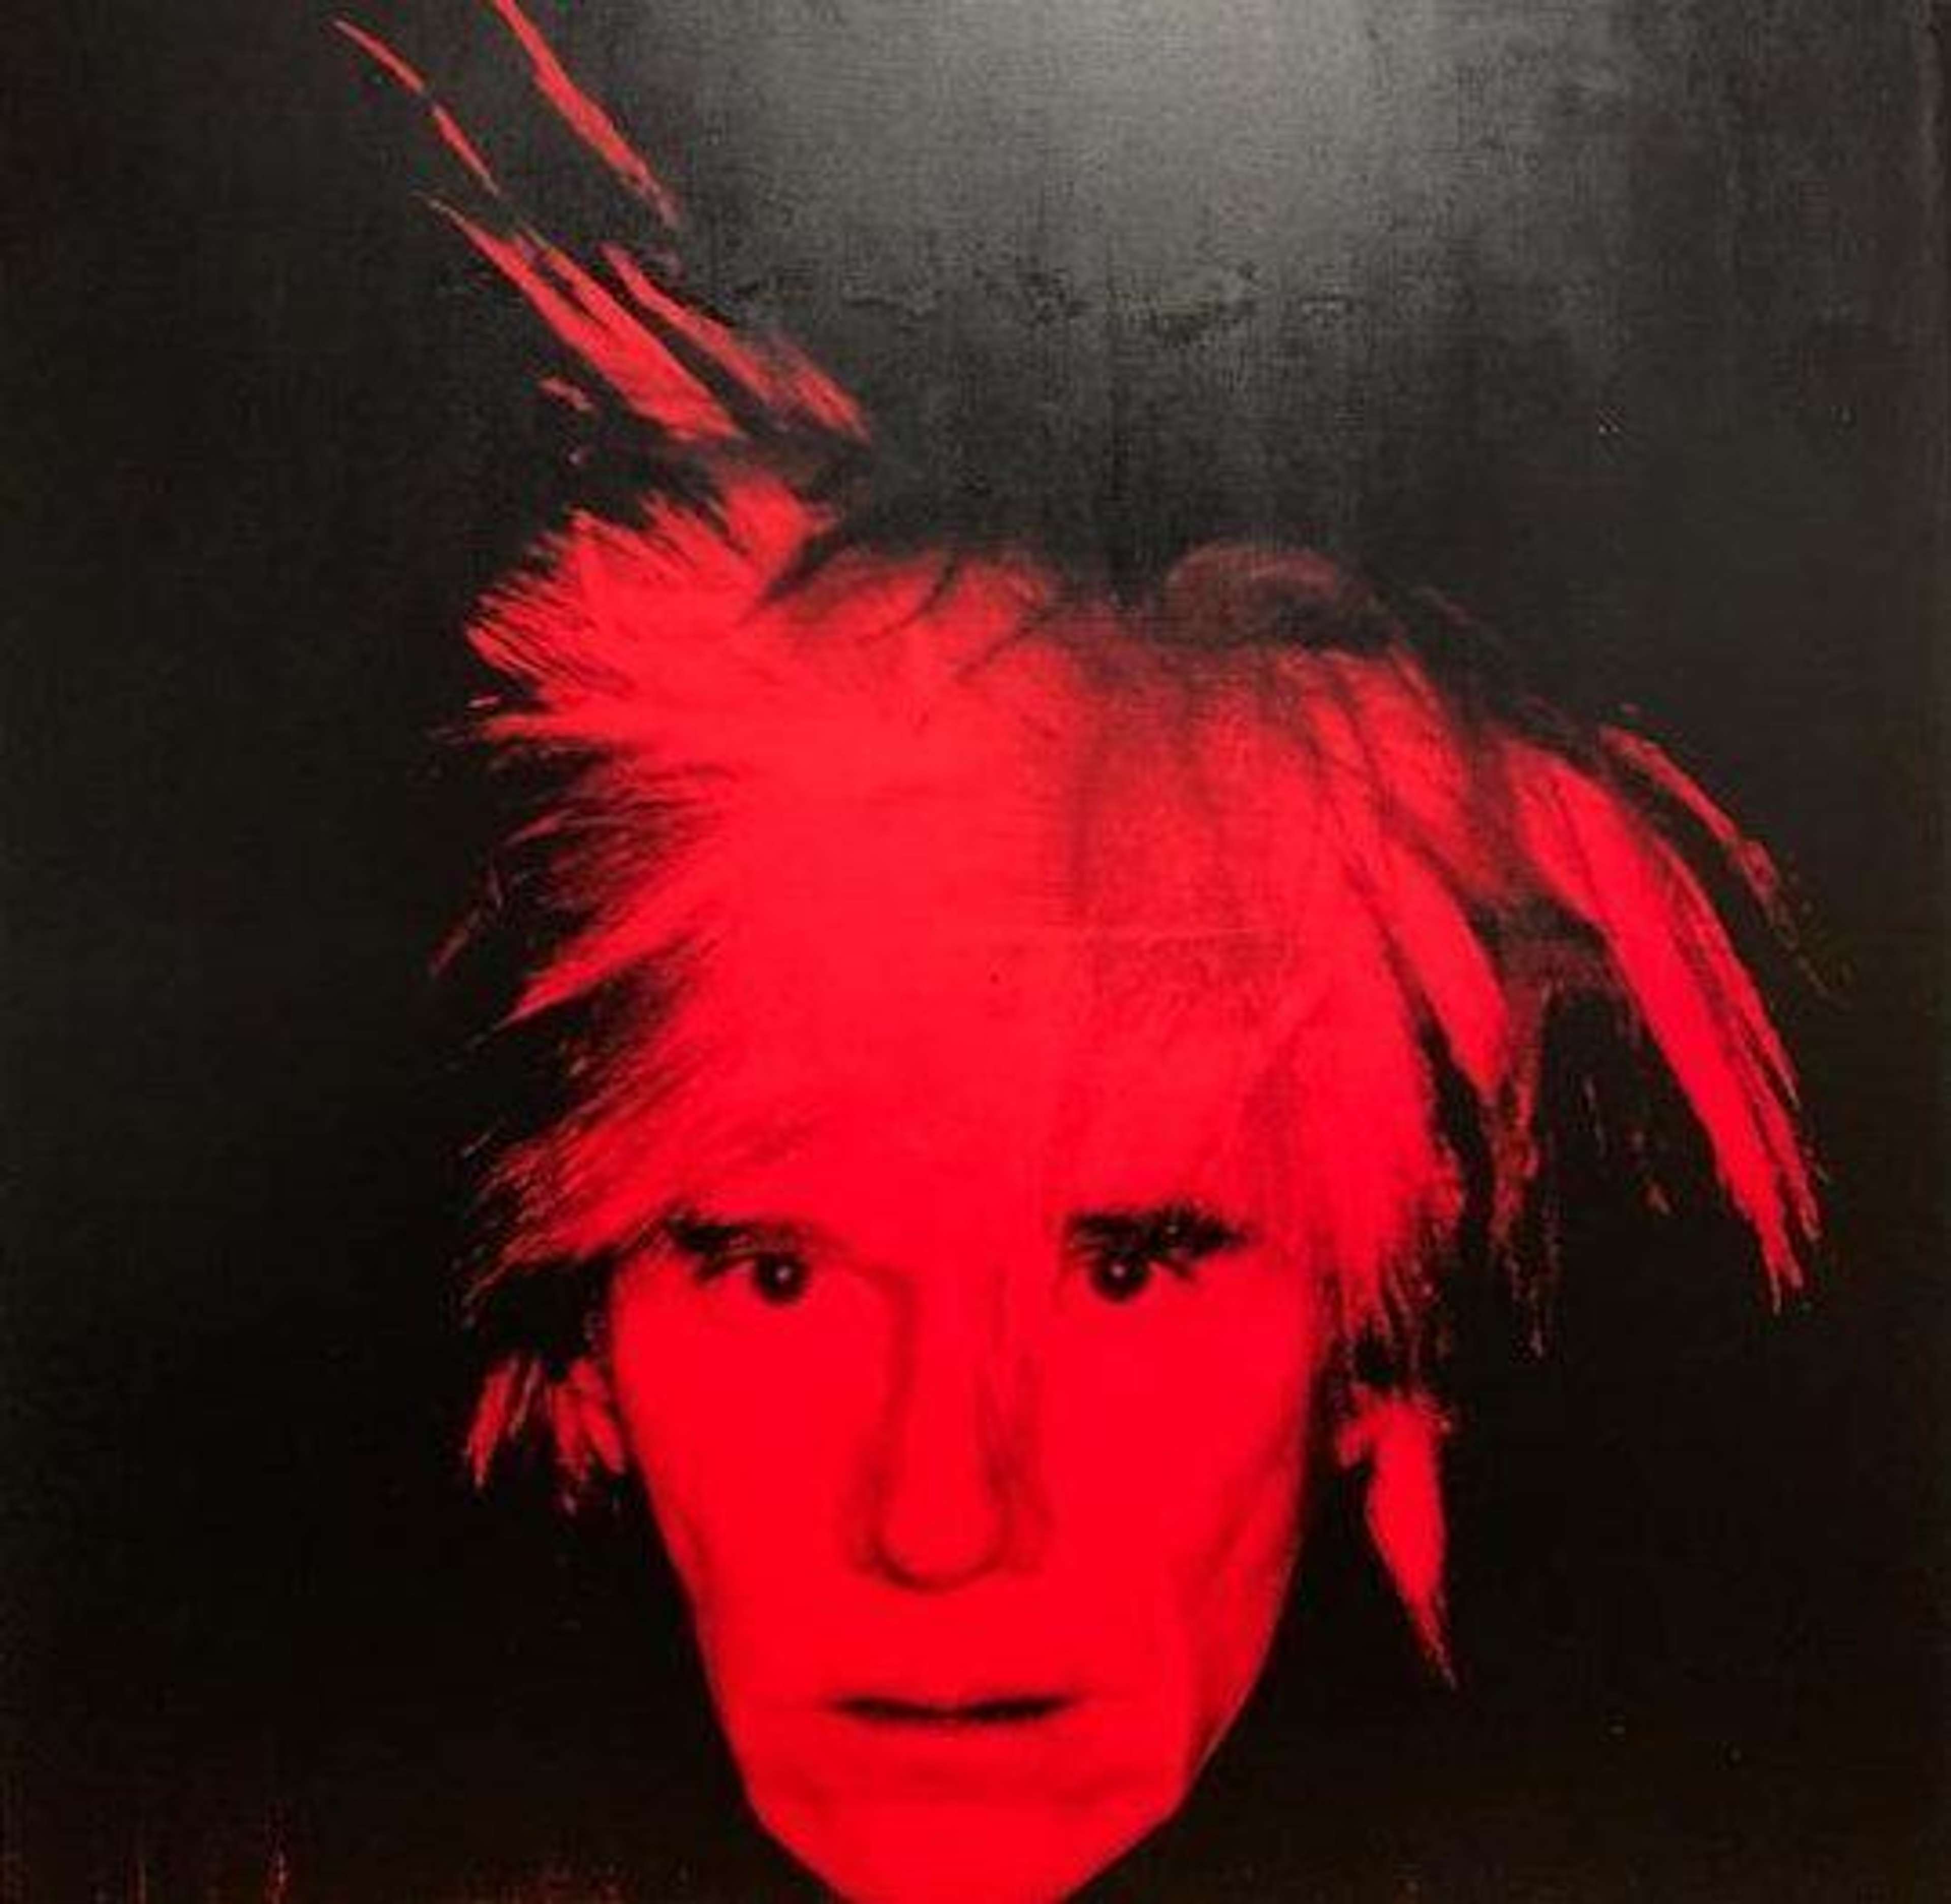 The Ultimate Andy Warhol Guide: 25 Key Facts Every Warhol Fan Should Know